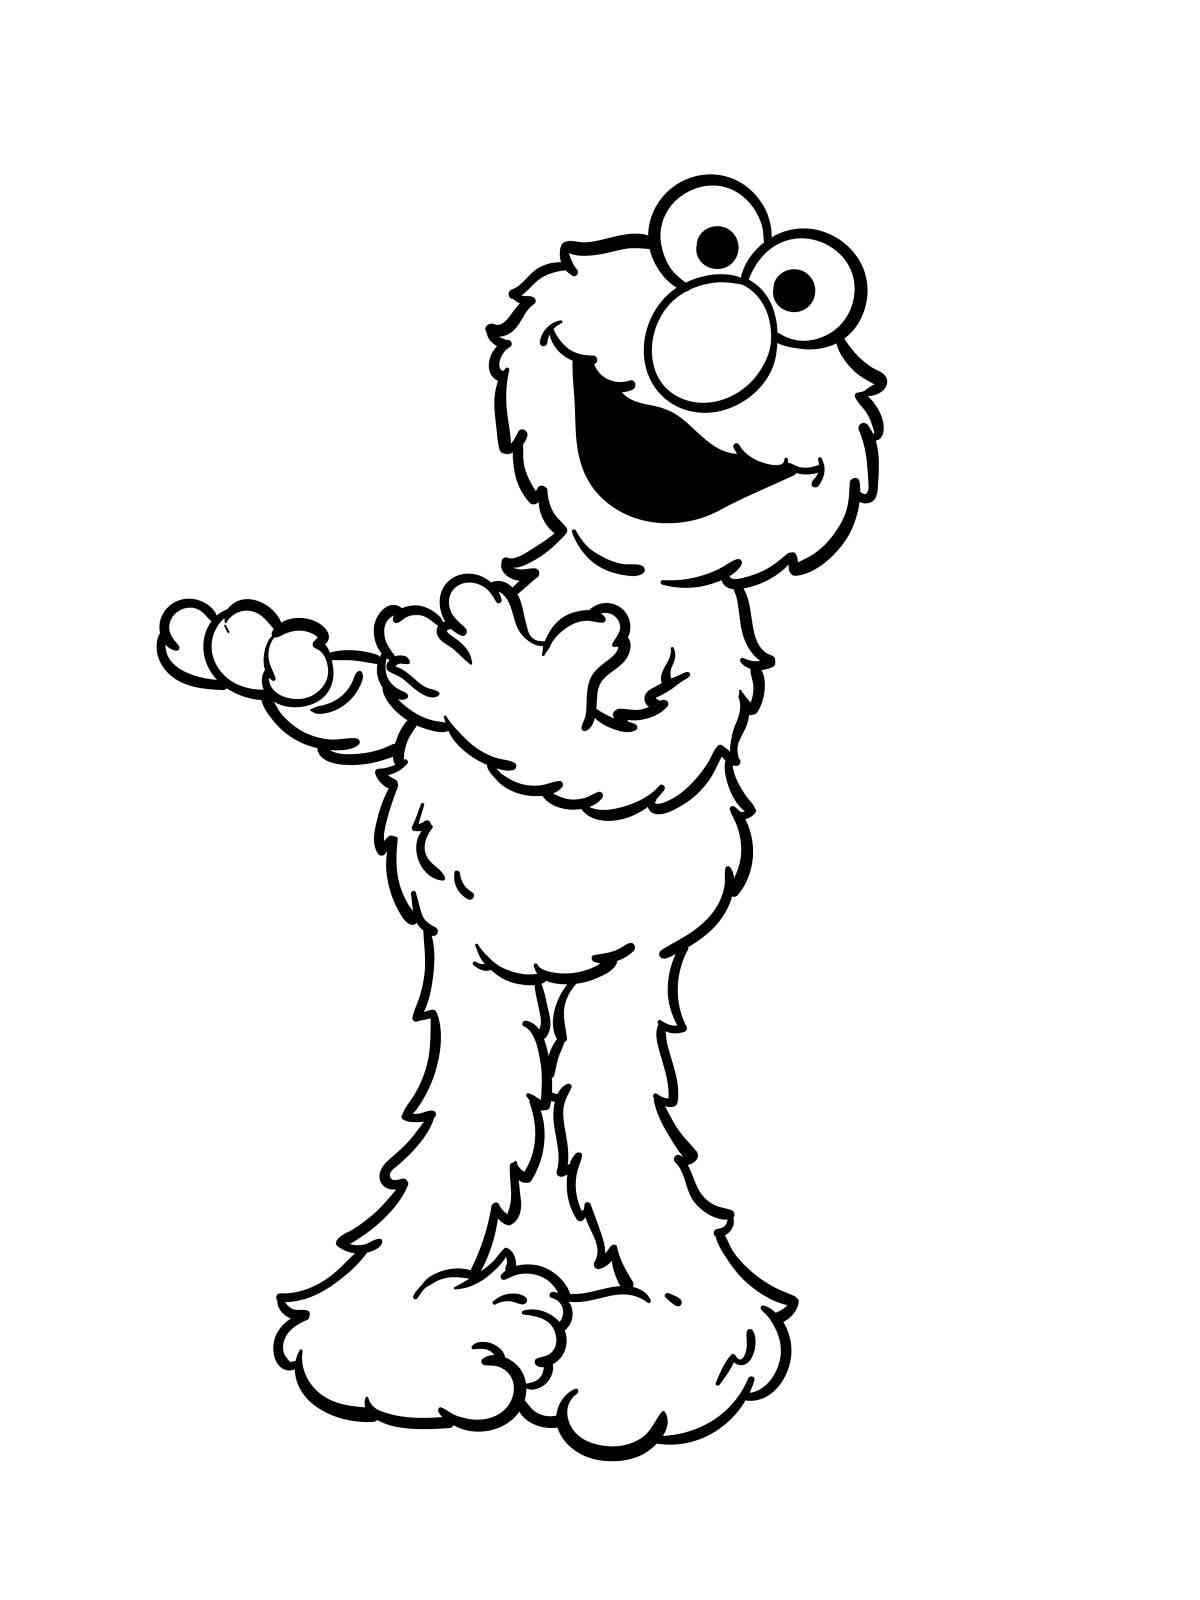 baby elmo printable coloring pages